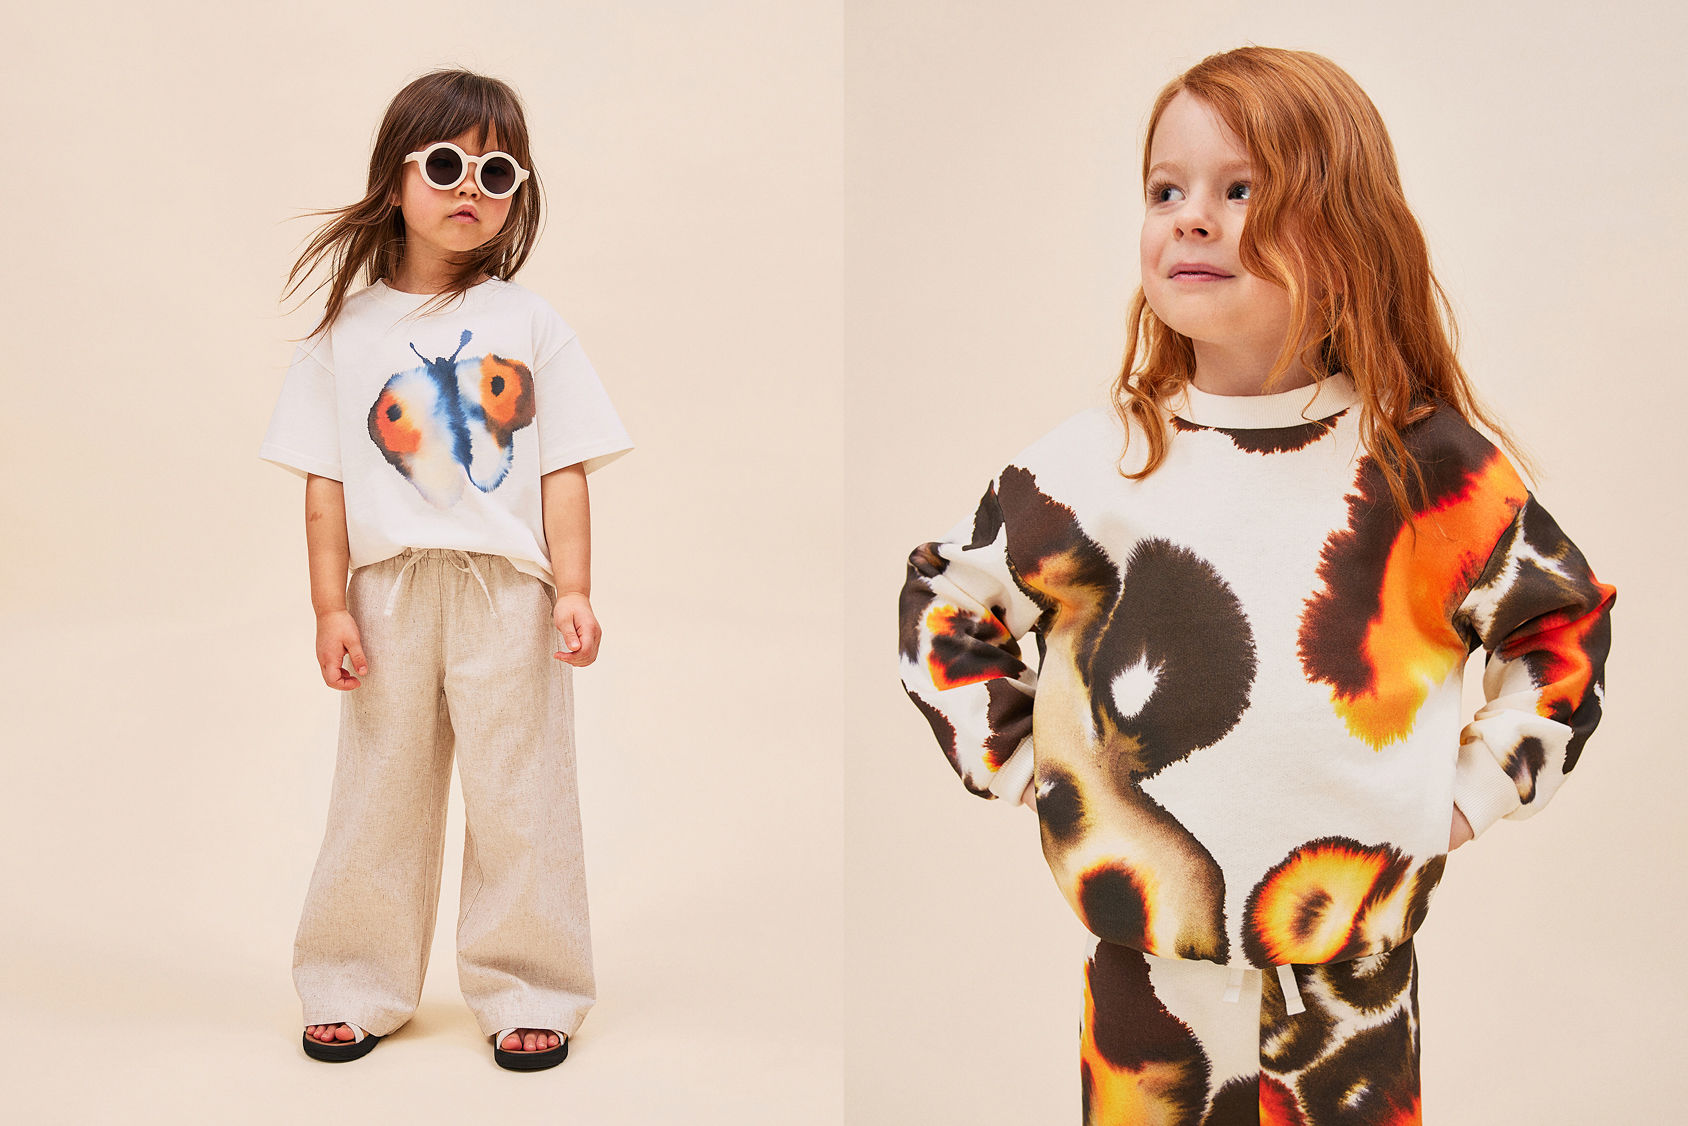 LET YOUR IMAGINATION RUN FREE WITH ROP VAN MIERLO X H&M